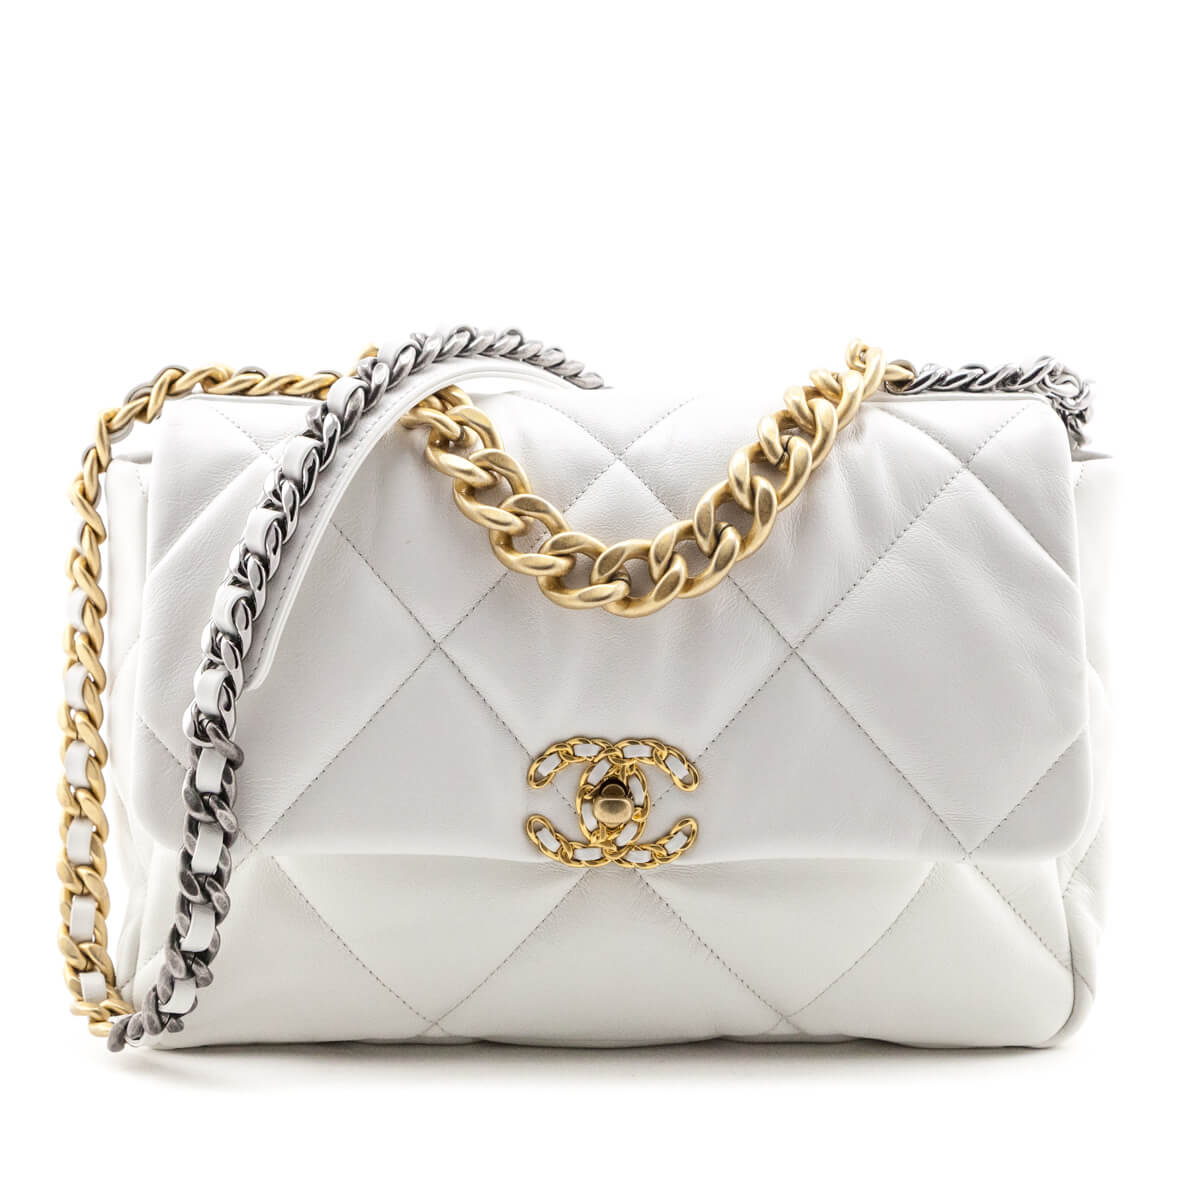 Chanel White Lambskin Quilted Tote Bag with Embossed Snakeskin “CC” Logo